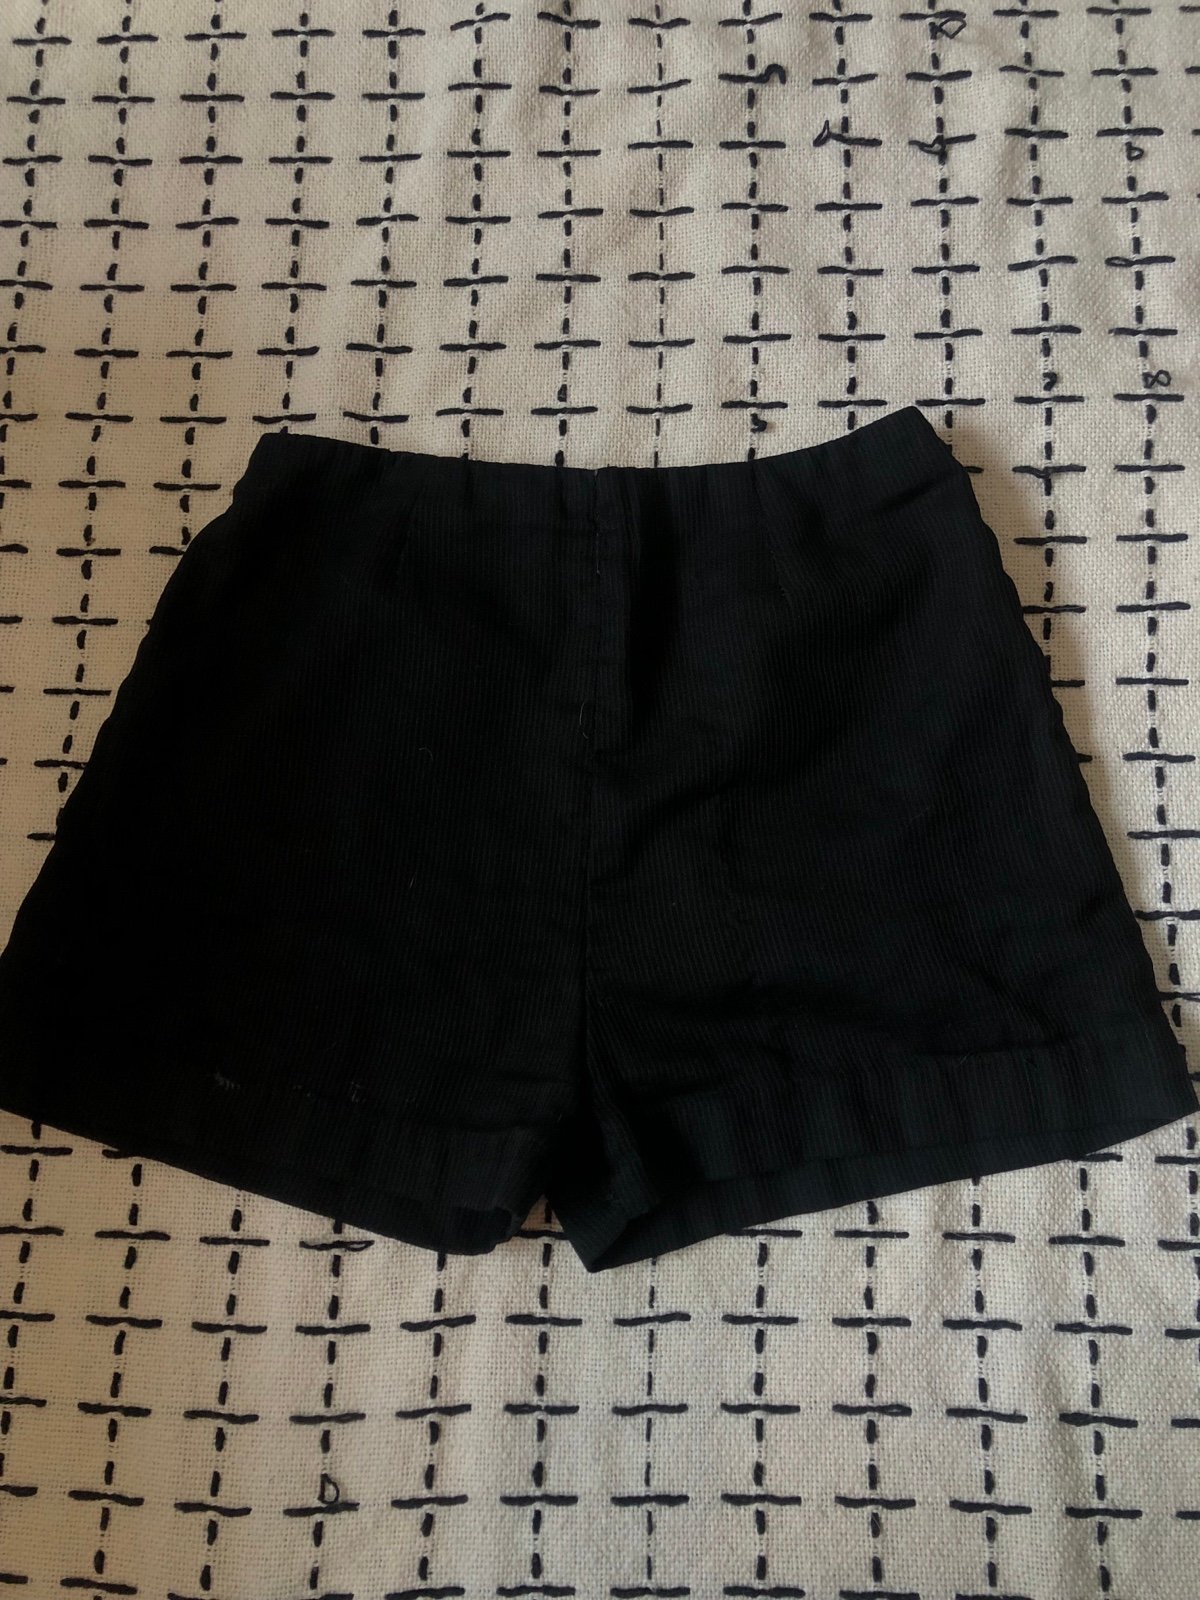 the Lowest price Vintage High Waisted Shorts 24” kgs1Ro